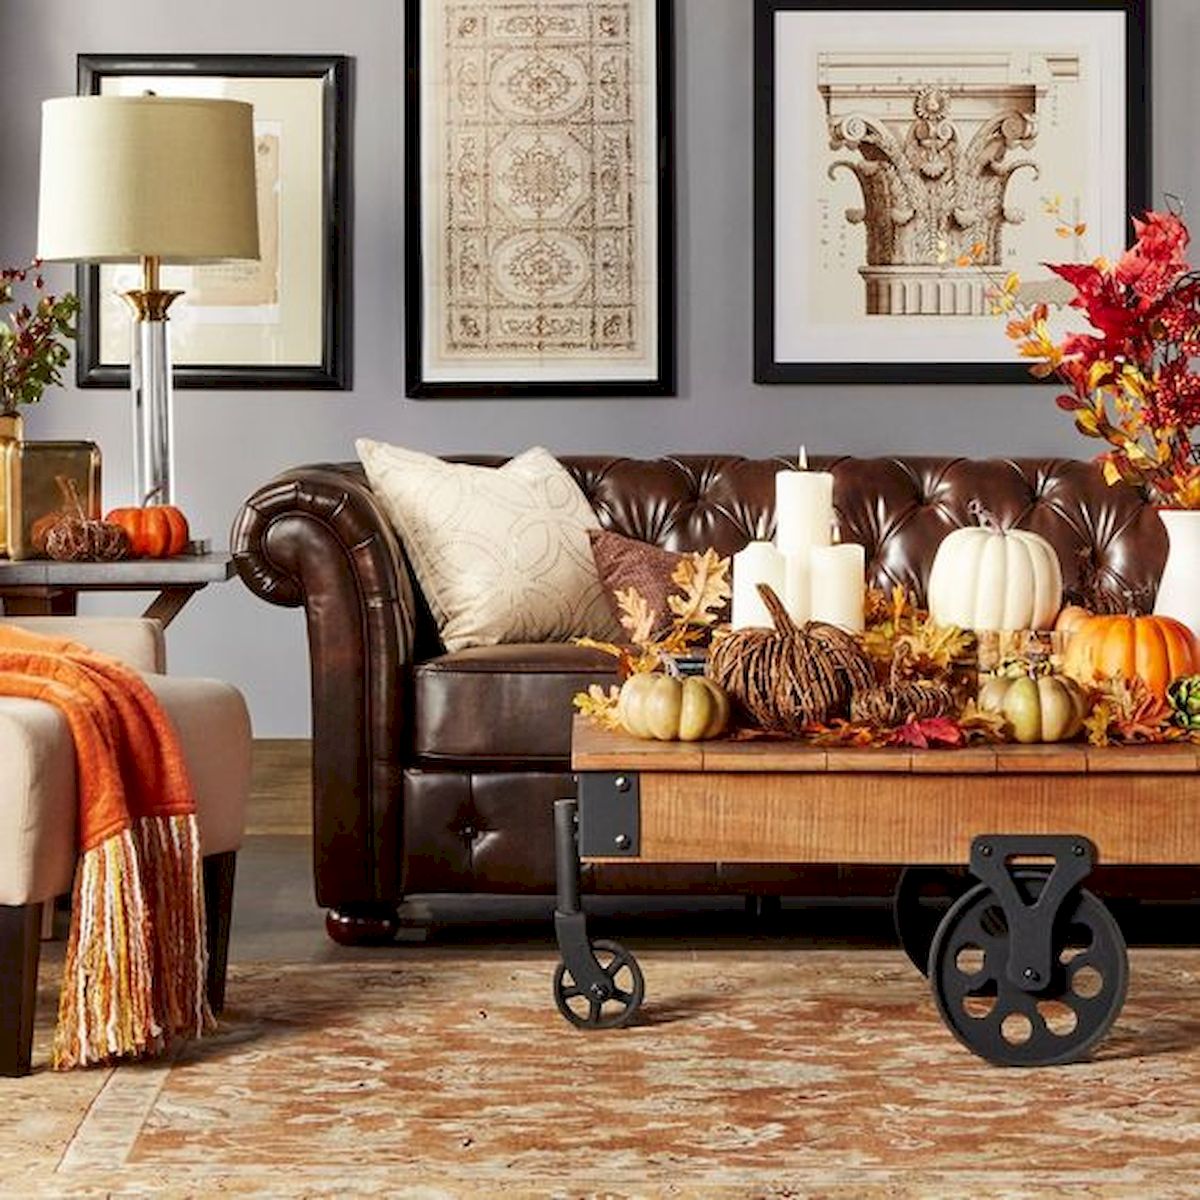 40 Awesome Fall Decoration Ideas For Living Room (9)